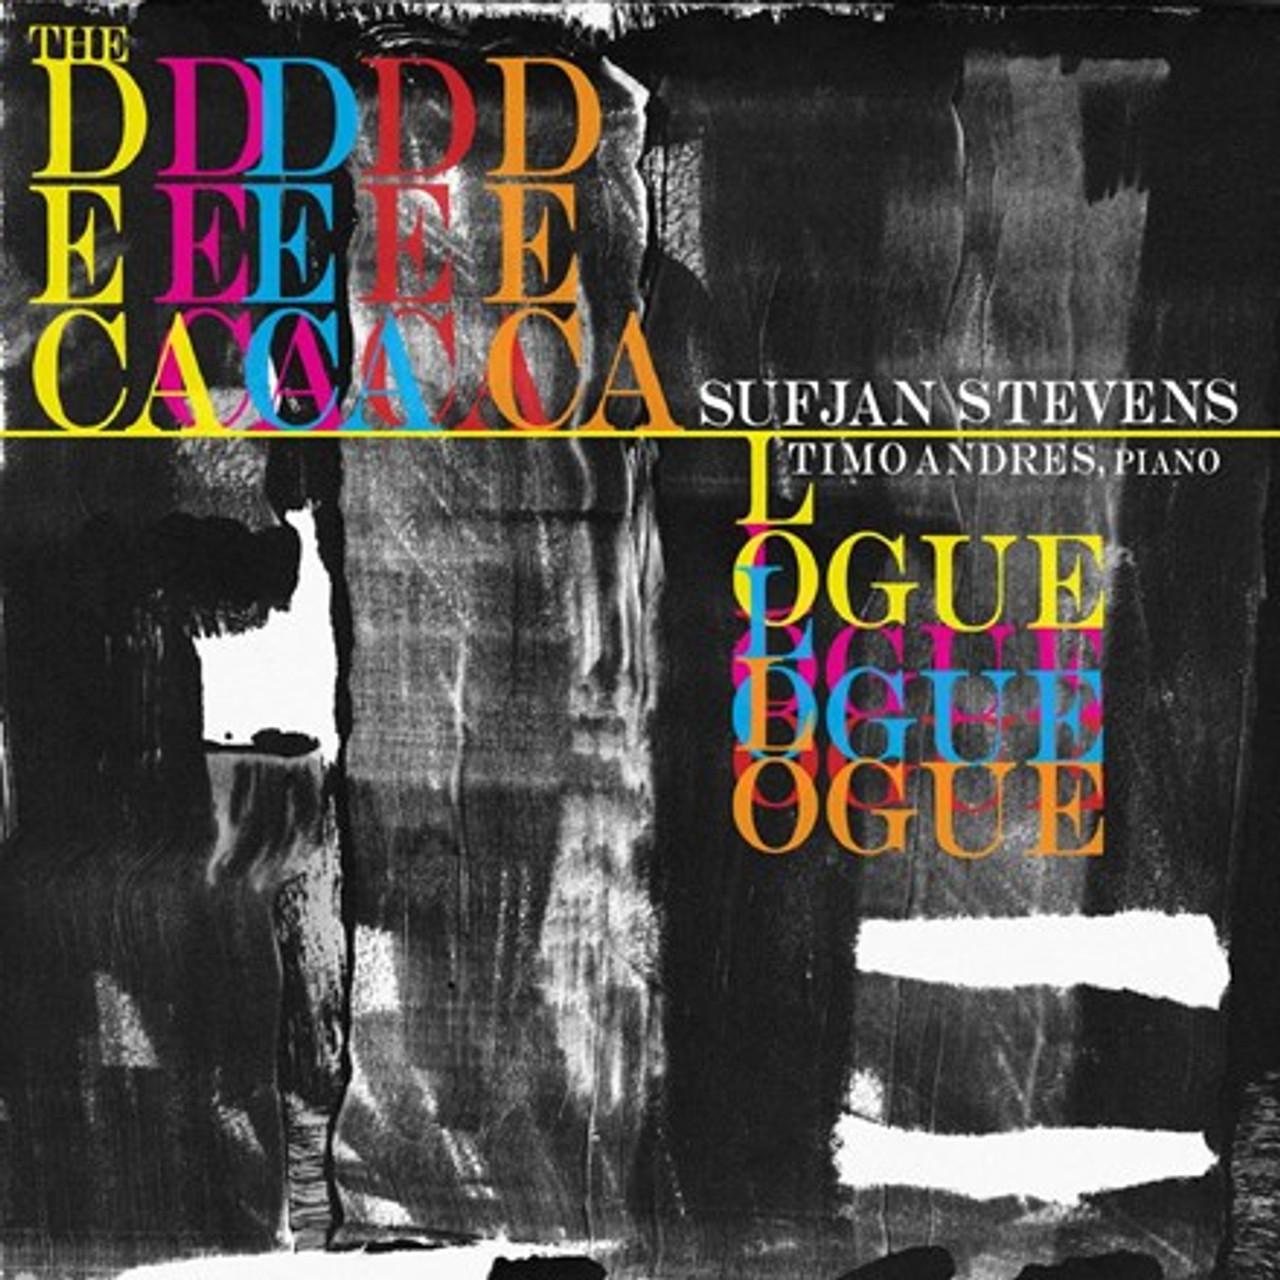 Årligt flyde Aktiver Sufjan Stevens and Timo Andres - The Decalogue: Deluxe (180g Vinyl LP) * *  * - Music Direct